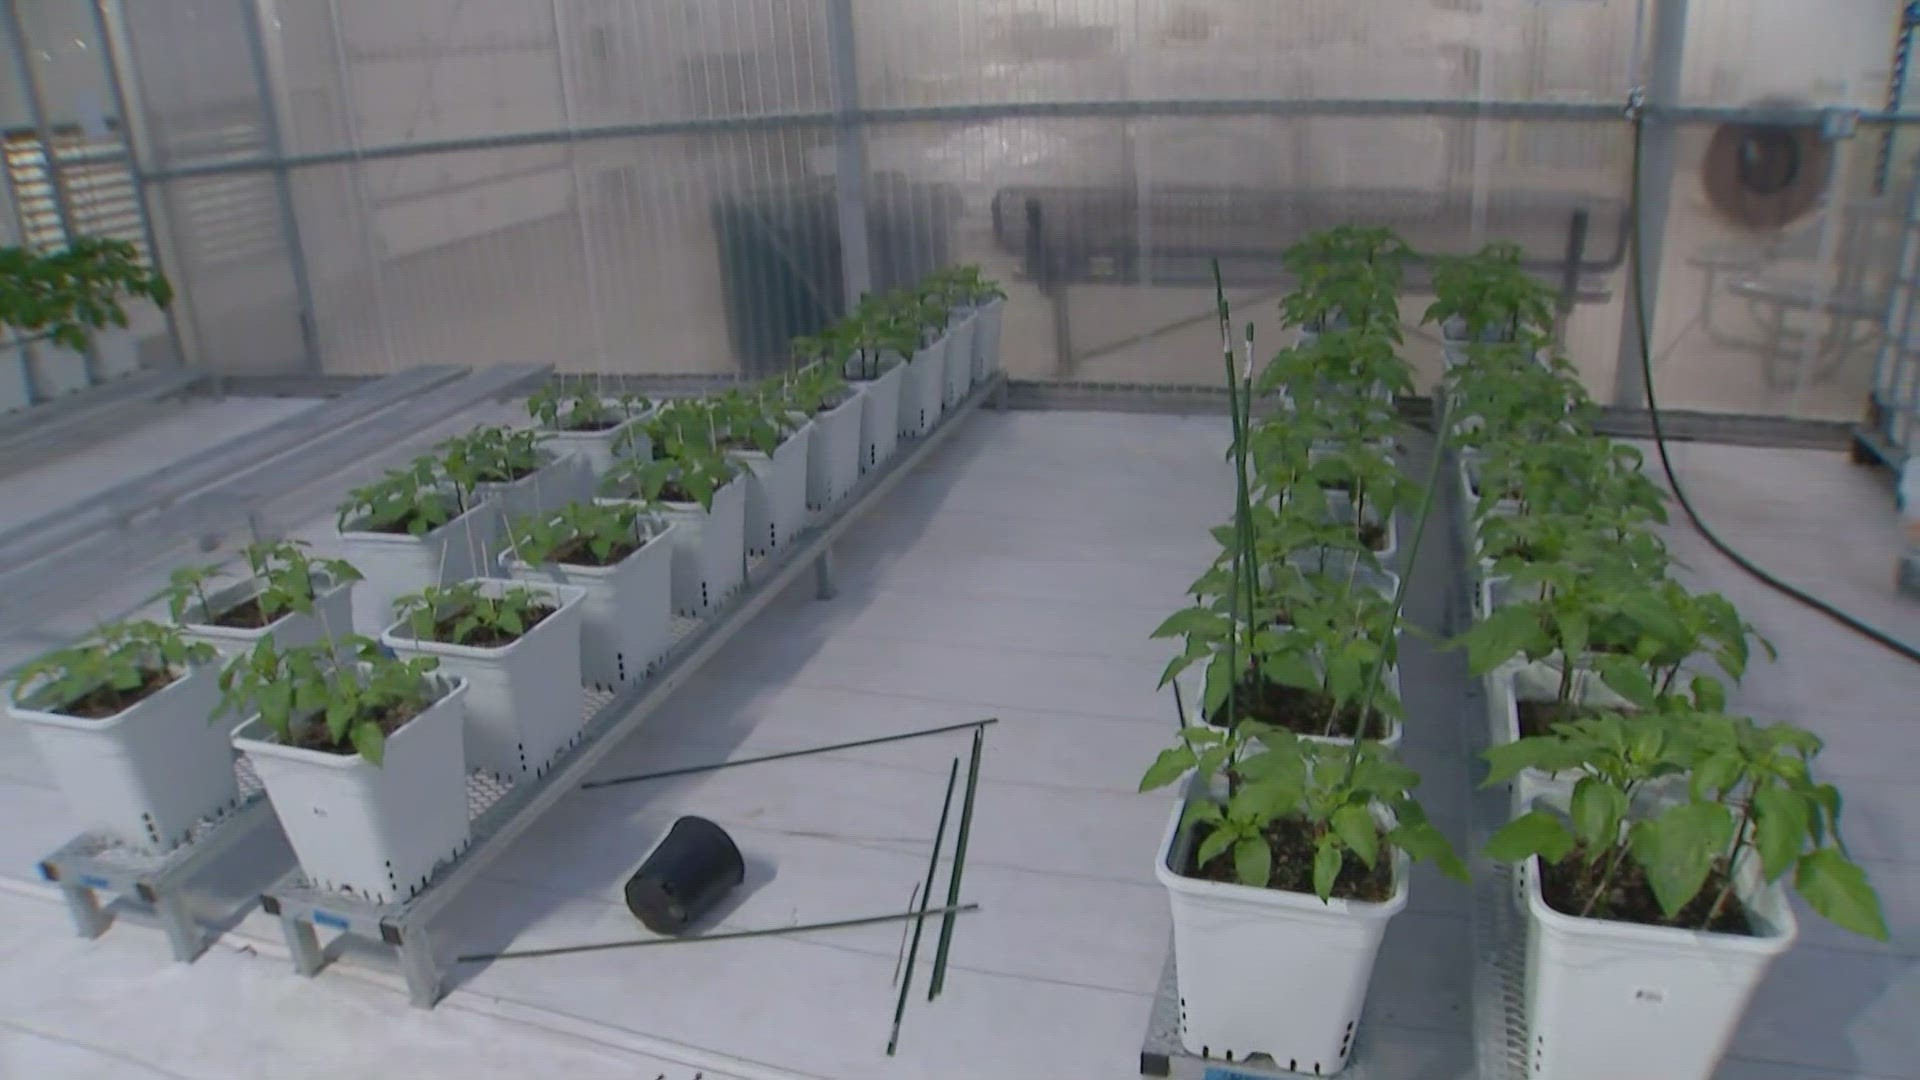 The school district uses a greenhouse to grow food year-round, producing thousands of pounds of food for school cafeterias.